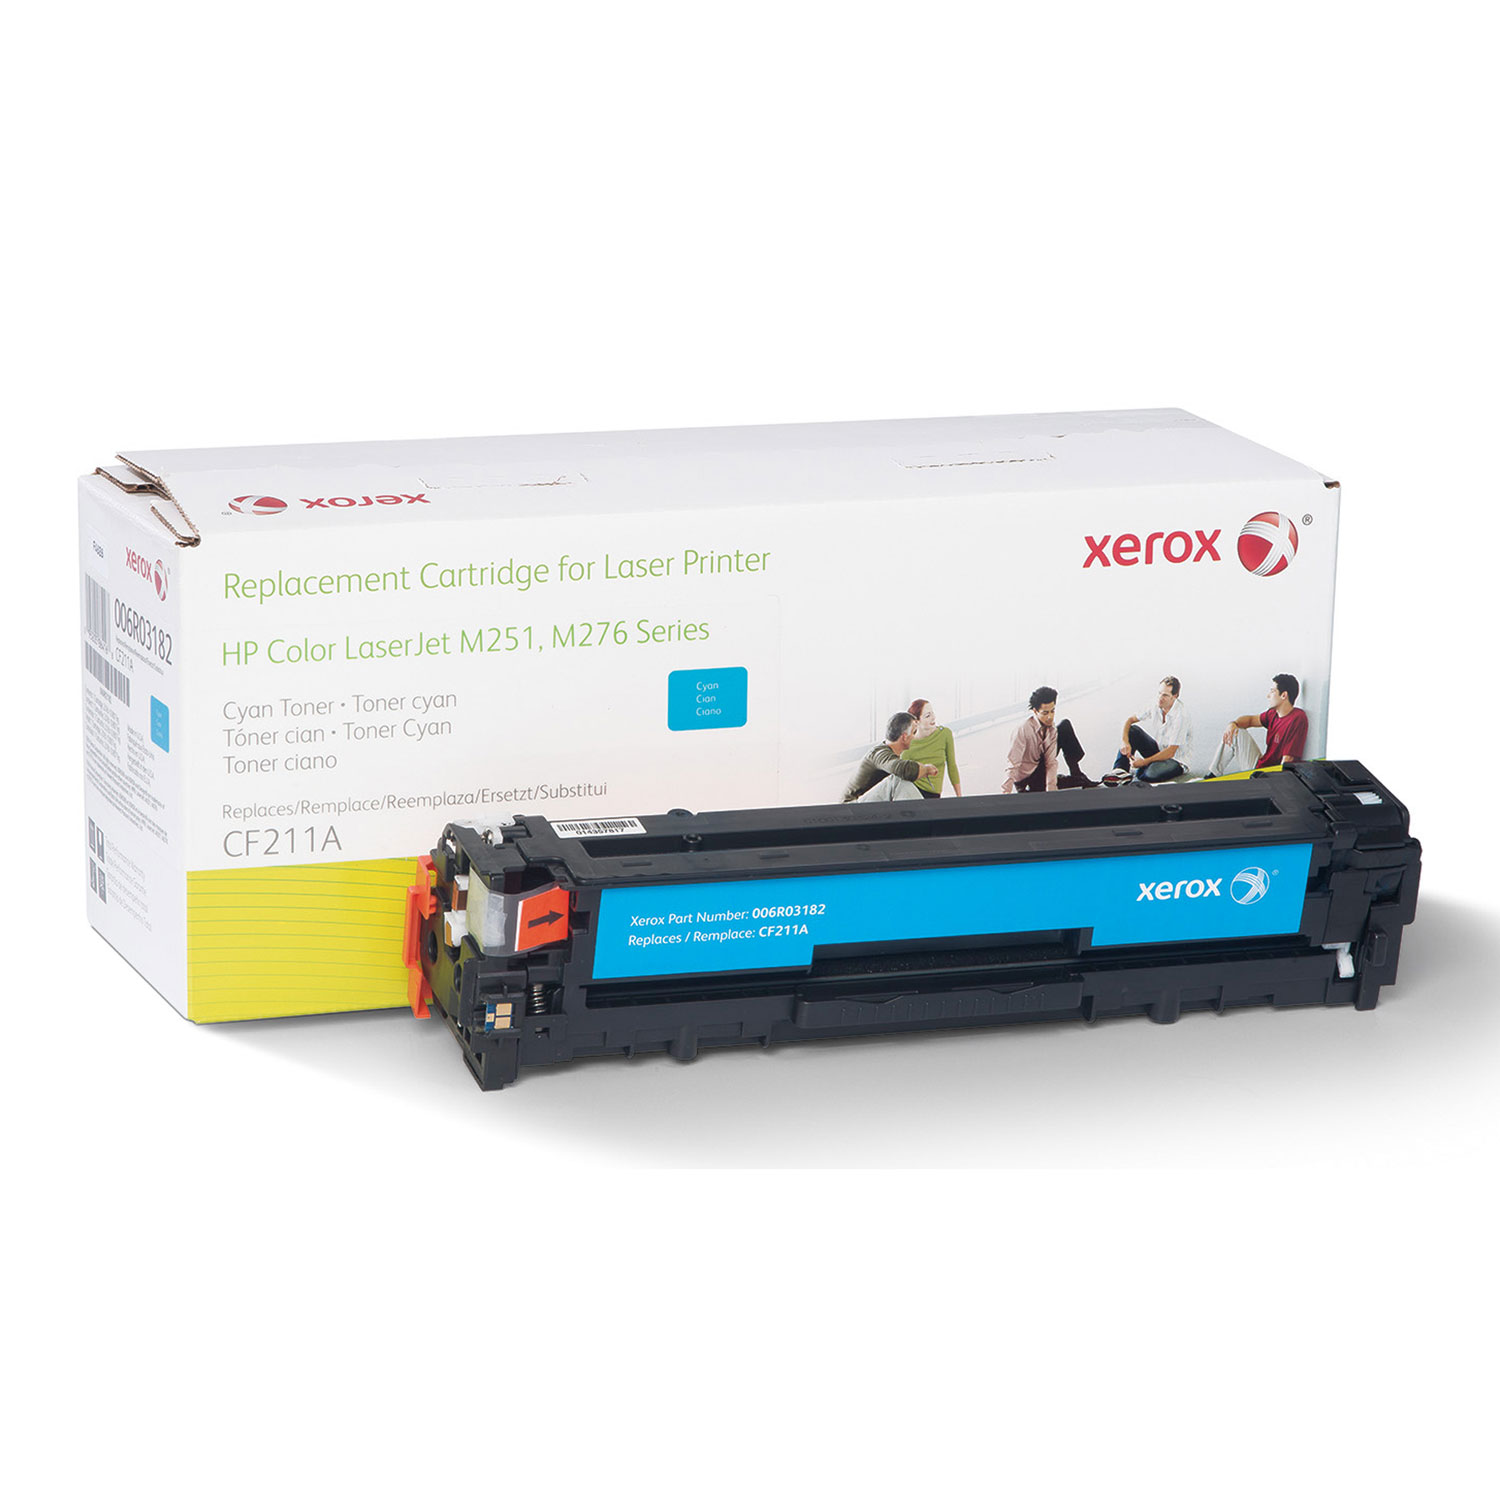  Xerox 006R03182 006R03182 Remanufactured CF211A (131A) Toner, 1800 Page-Yield, Cyan (XER006R03182) 